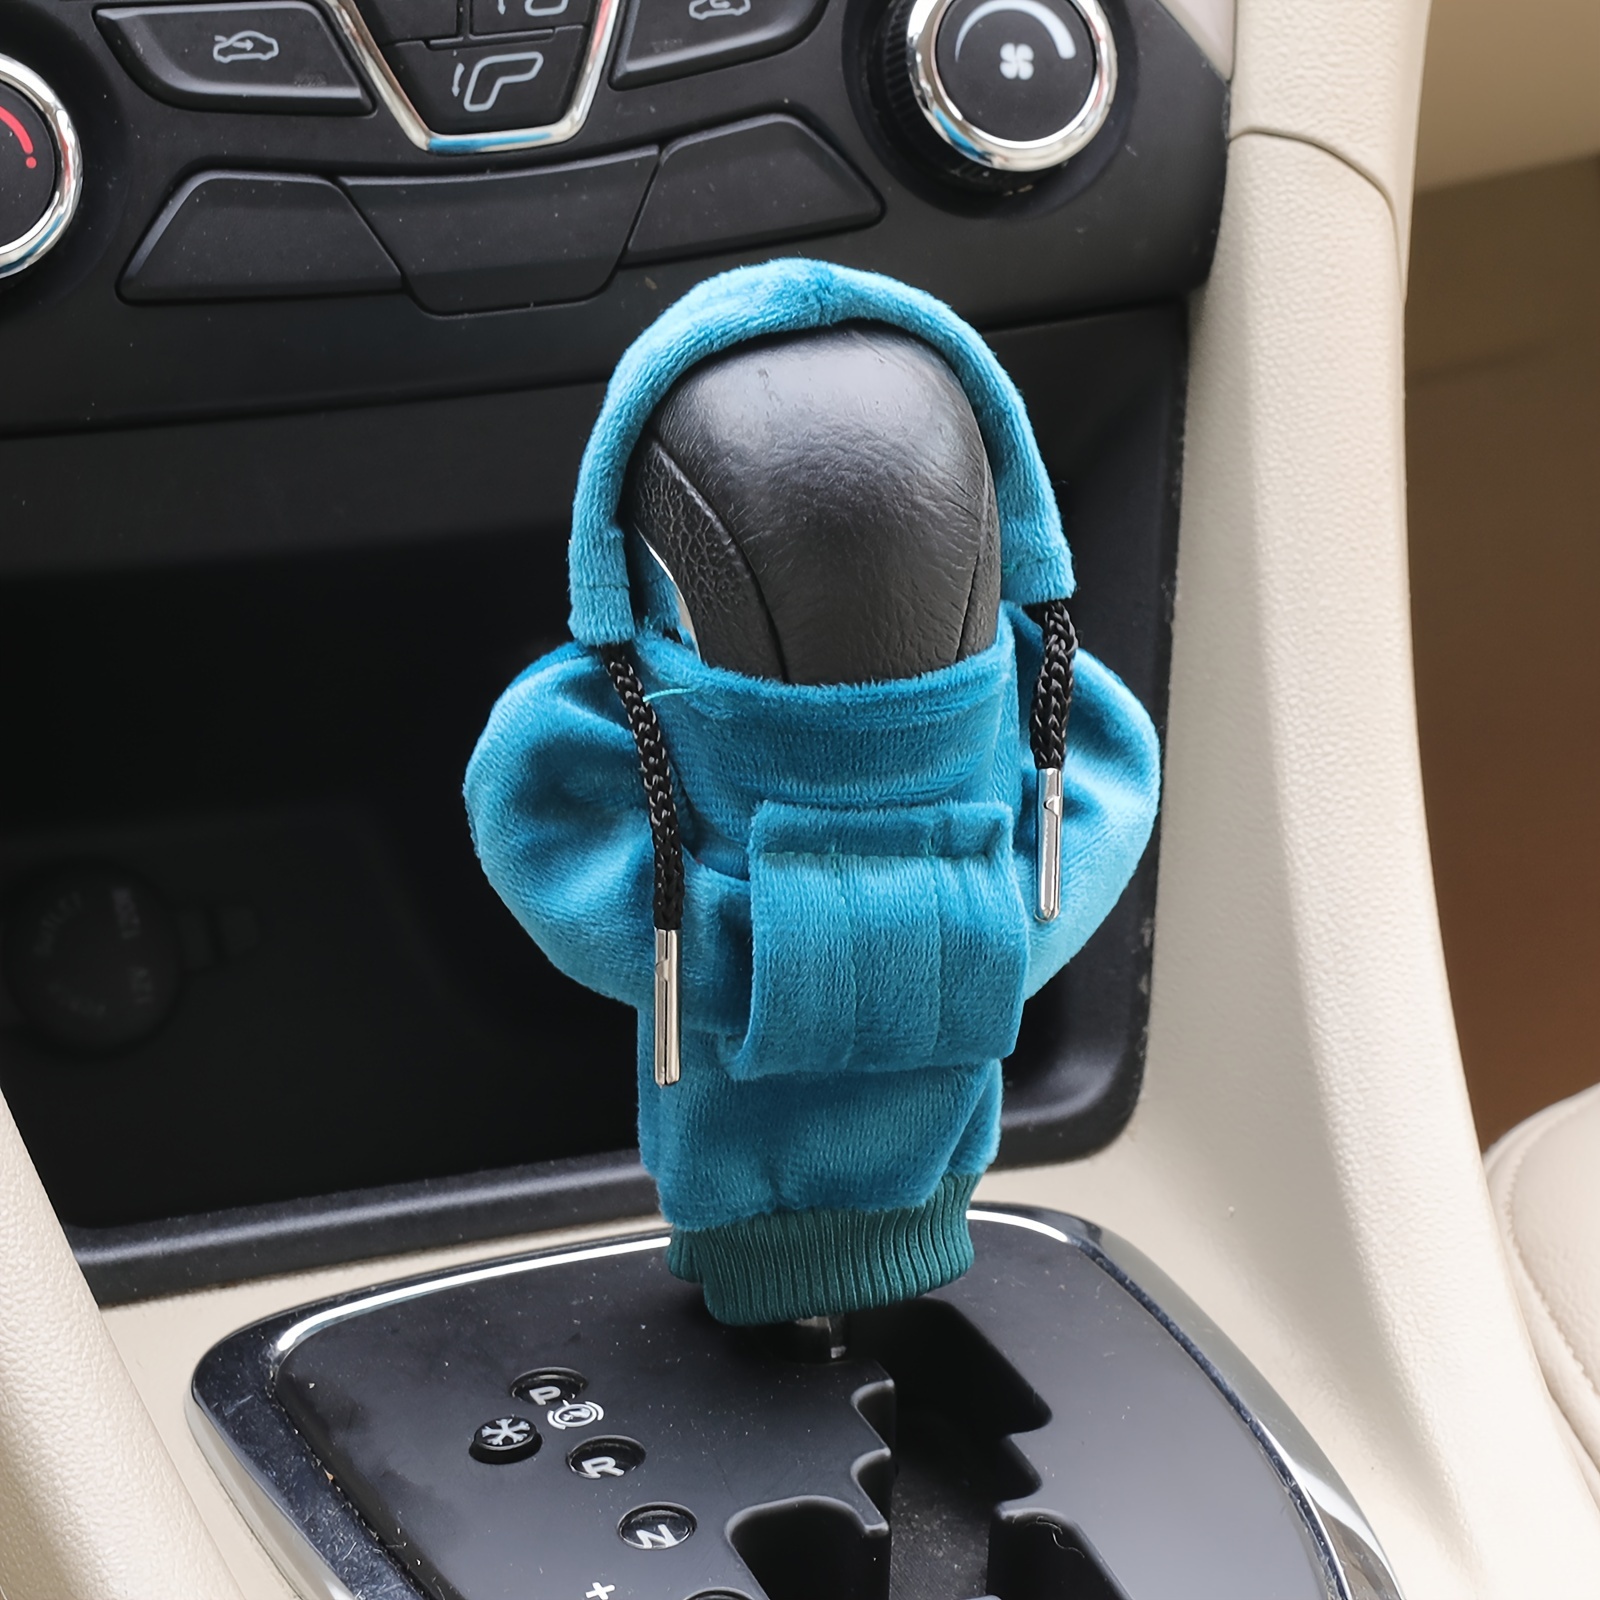 Car Gear Shift Cover,Vivid Gear Shift Knob Hoodie for Car Decorations &  Protections,Universal Car Interior Accessories Stick Shift Cover Fits Car